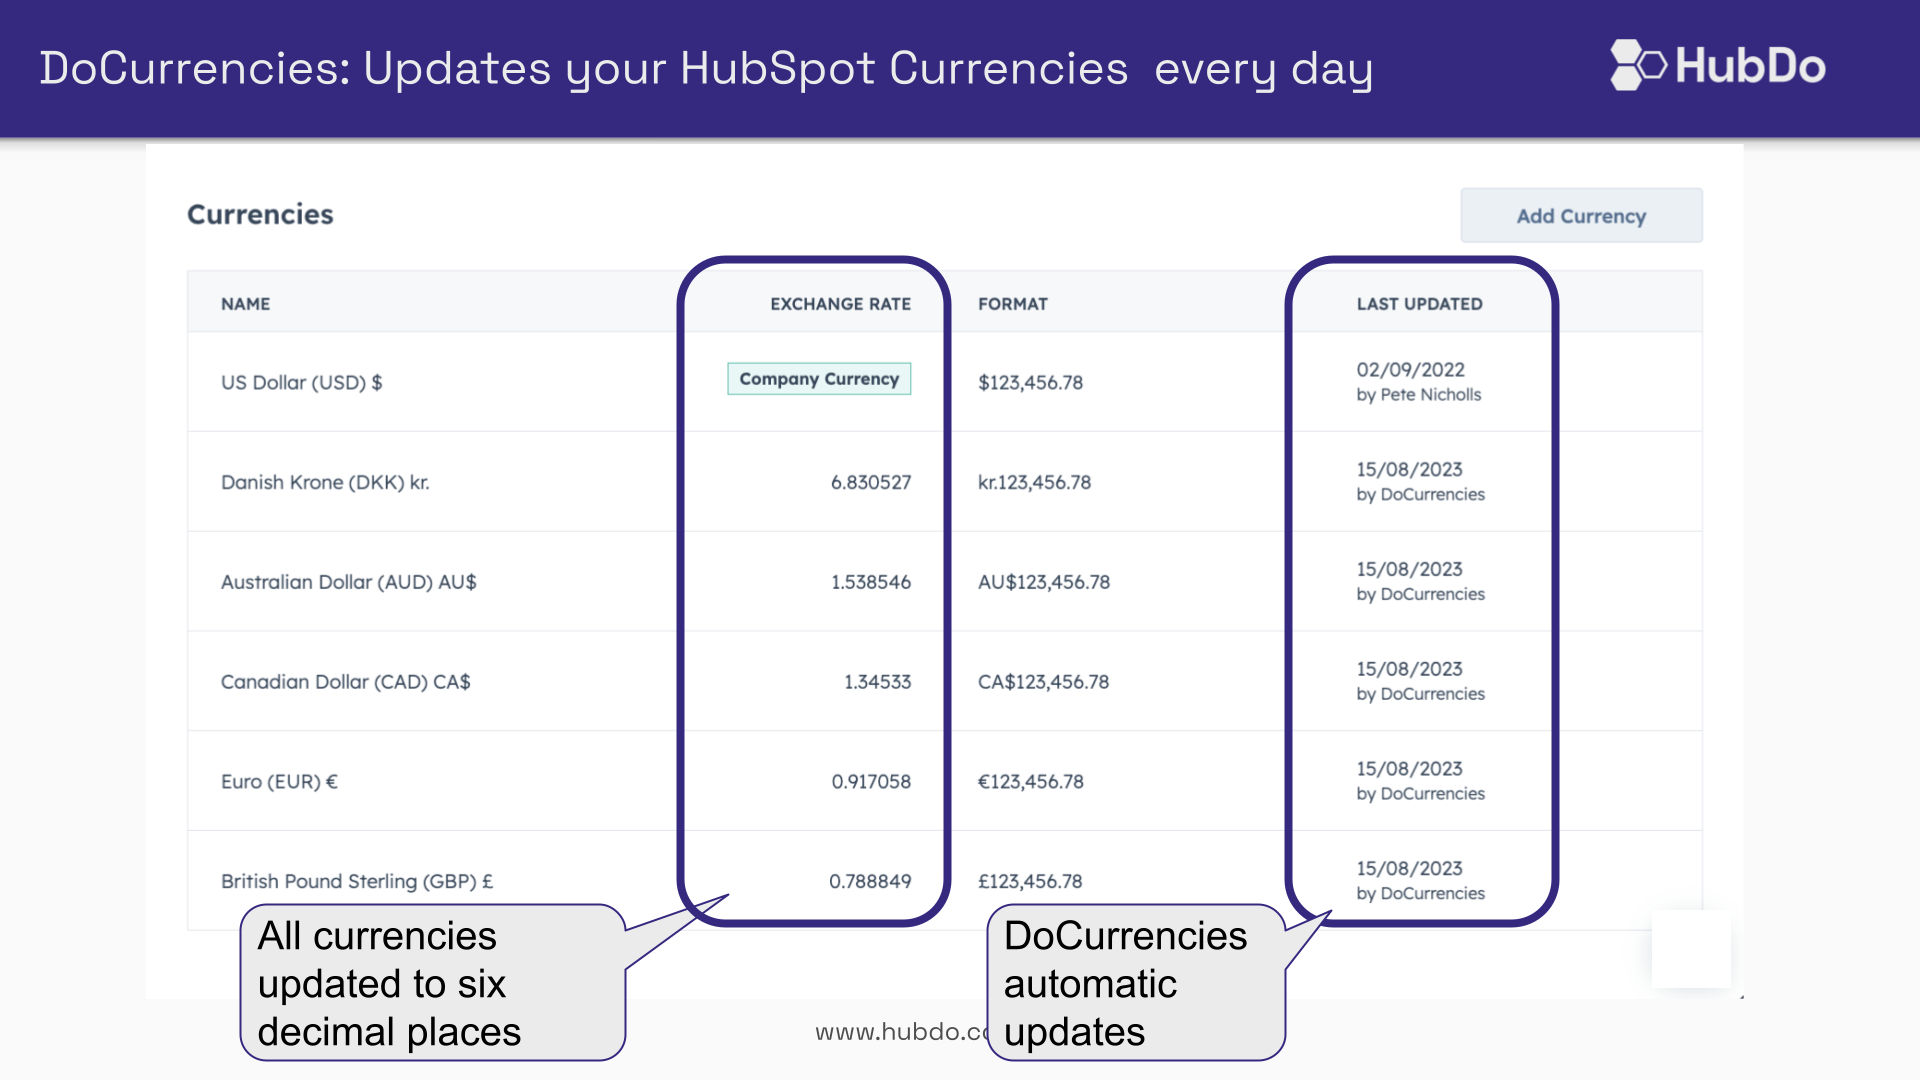 All currencies updates to six decimal places